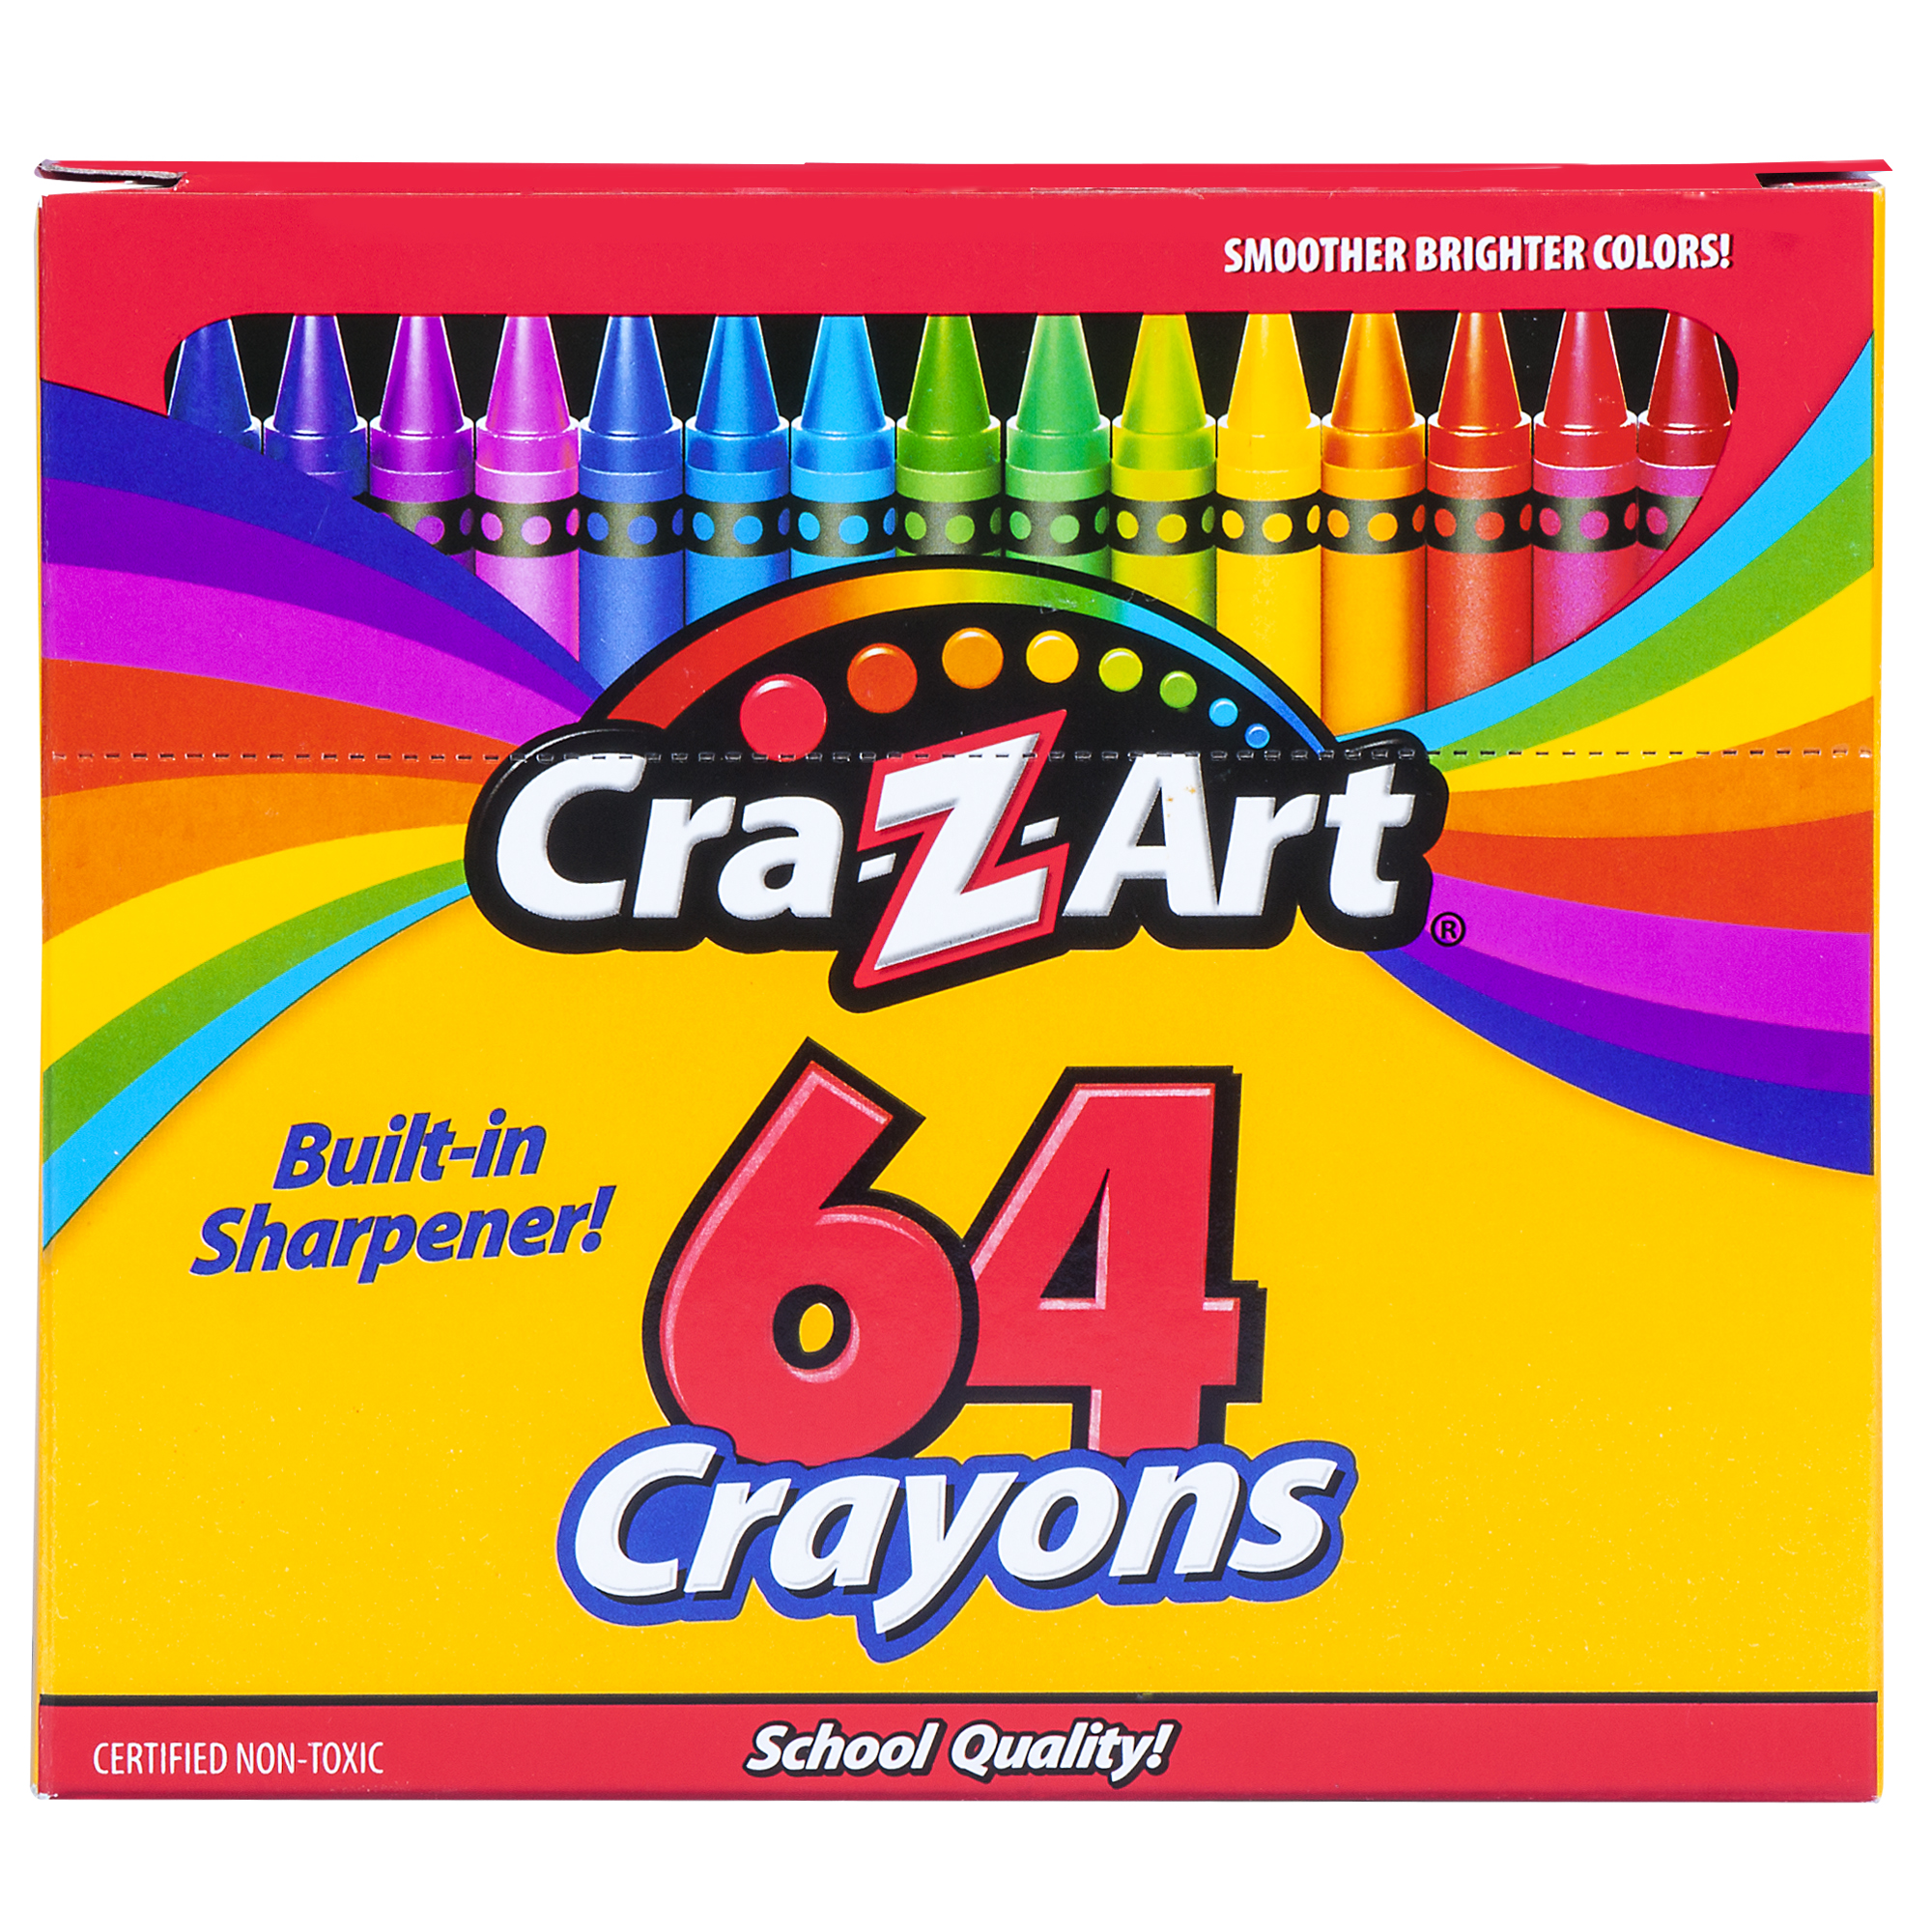 Cra-Z-Art Classic Crayons Multicolor Bulk Pack, 64 Count, Built-in Sharpener, Back to School - image 1 of 9